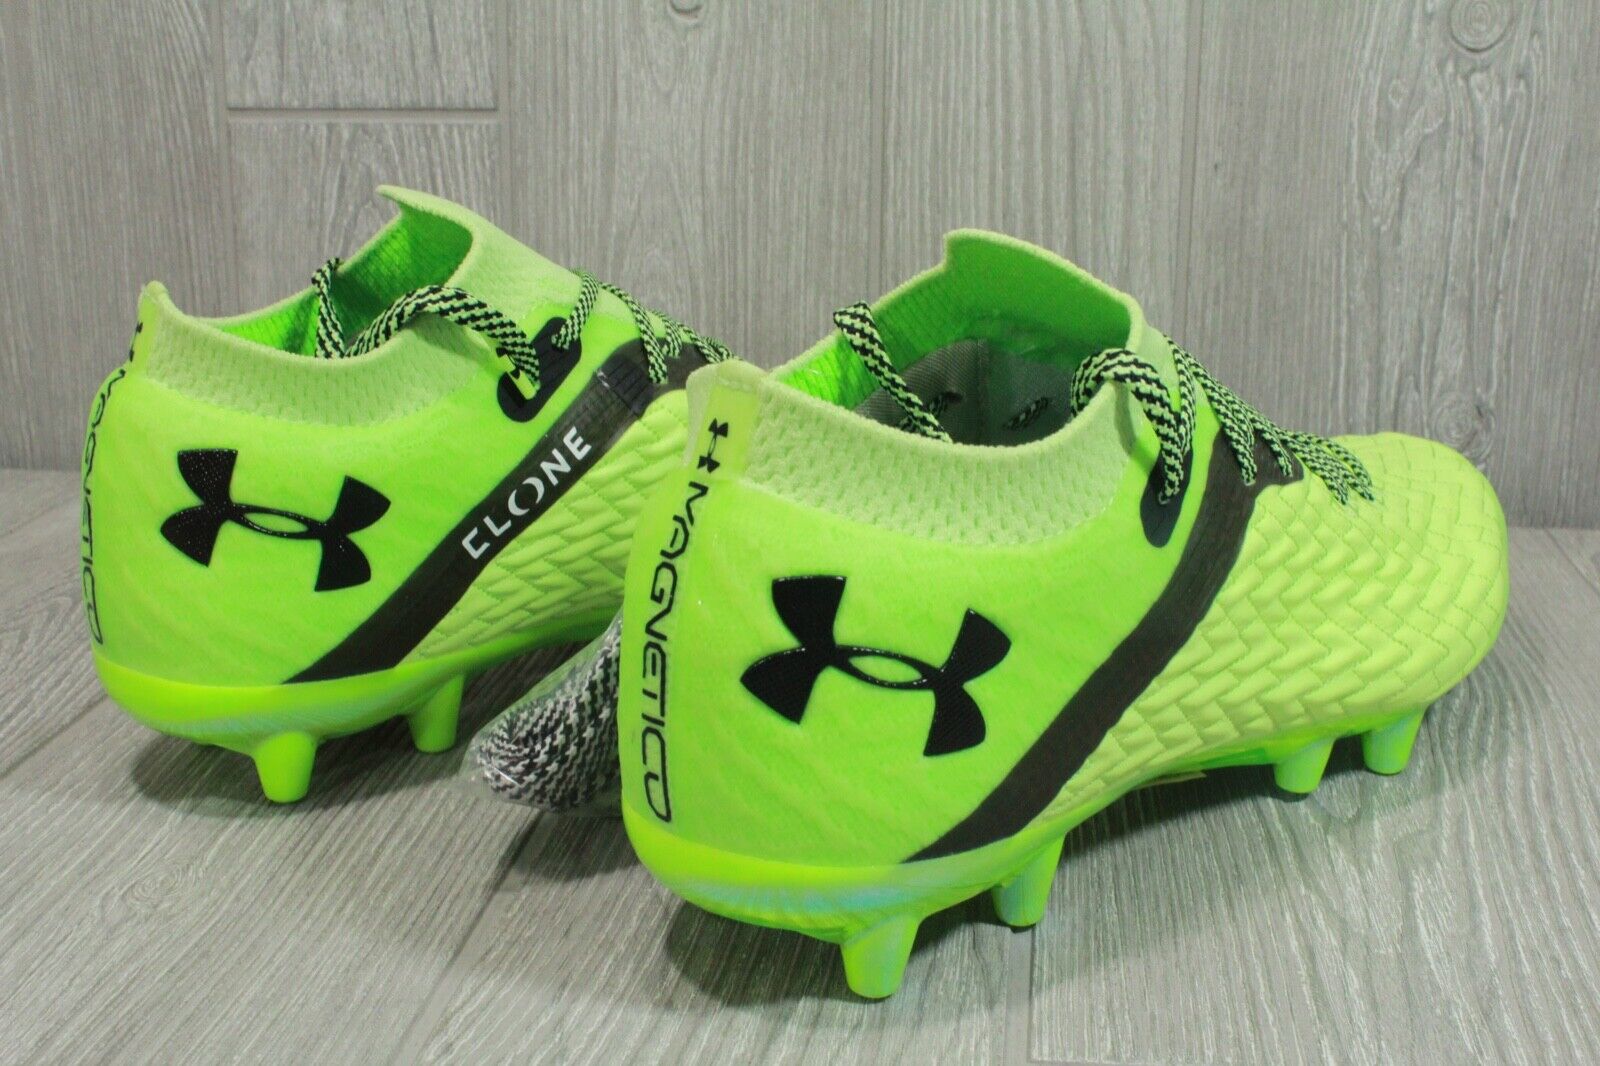 New Under Armour Men Clone Magnetico Pro FG Green Soccer Cleats 3022629-300  9.5